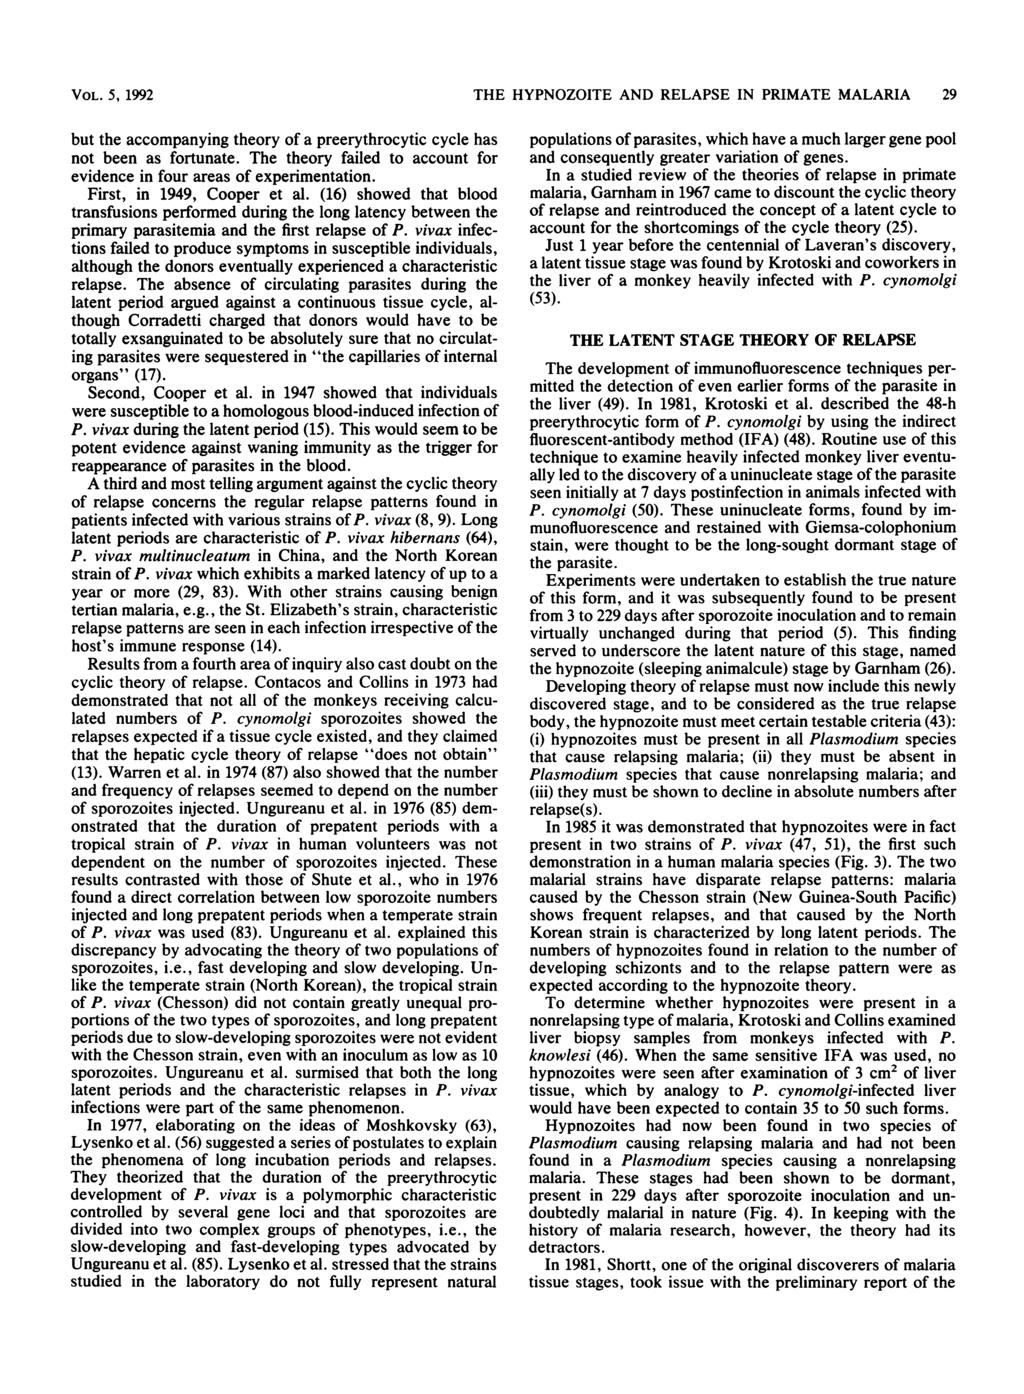 VOL. 5, 1992 THE HYPNOZOITE AND RELAPSE IN PRIMATE MALARIA 29 but the accompanying theory of a preerythrocytic cycle has not been as fortunate.